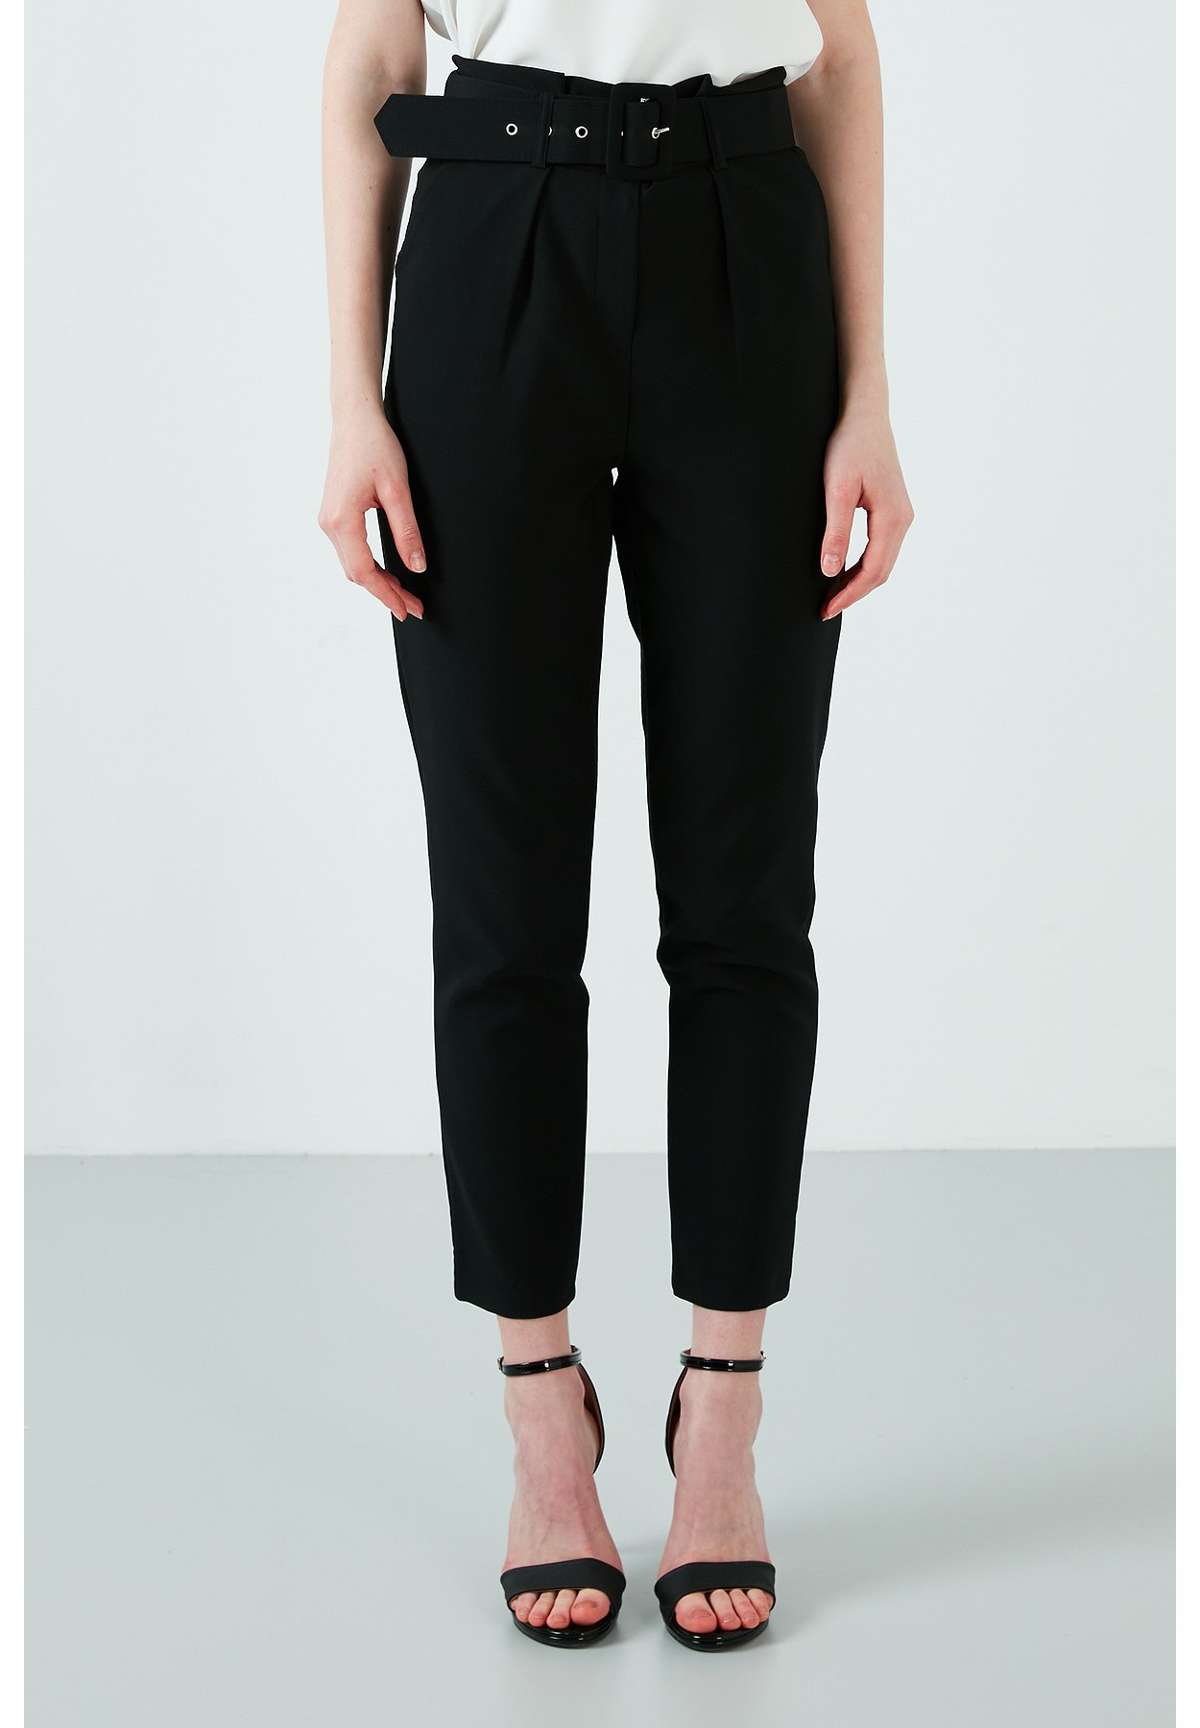 Брюки LELA HIGH WAISTED BELTED POCKET TROUSERS WOMEN'S TROUSERS